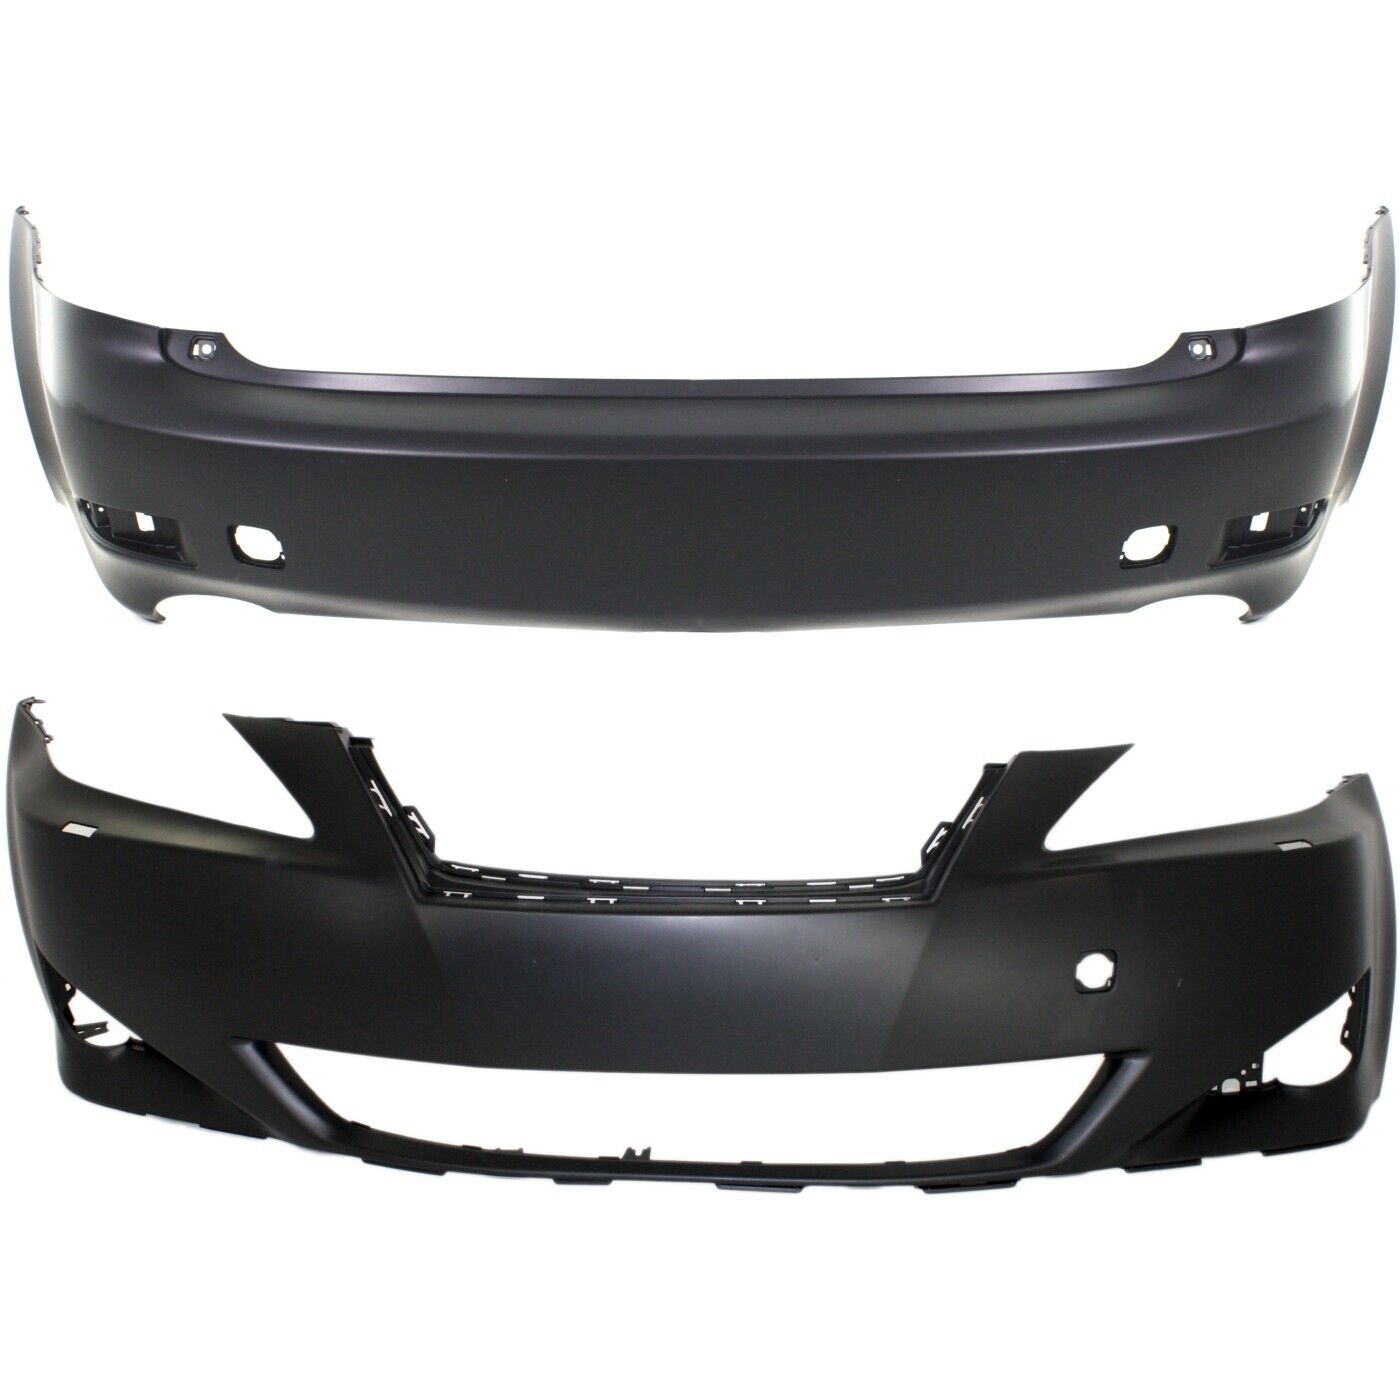 Front & Rear Bumper Cover Set For 2006-2008 Lexus IS250 w/ Headlight Washer Hole